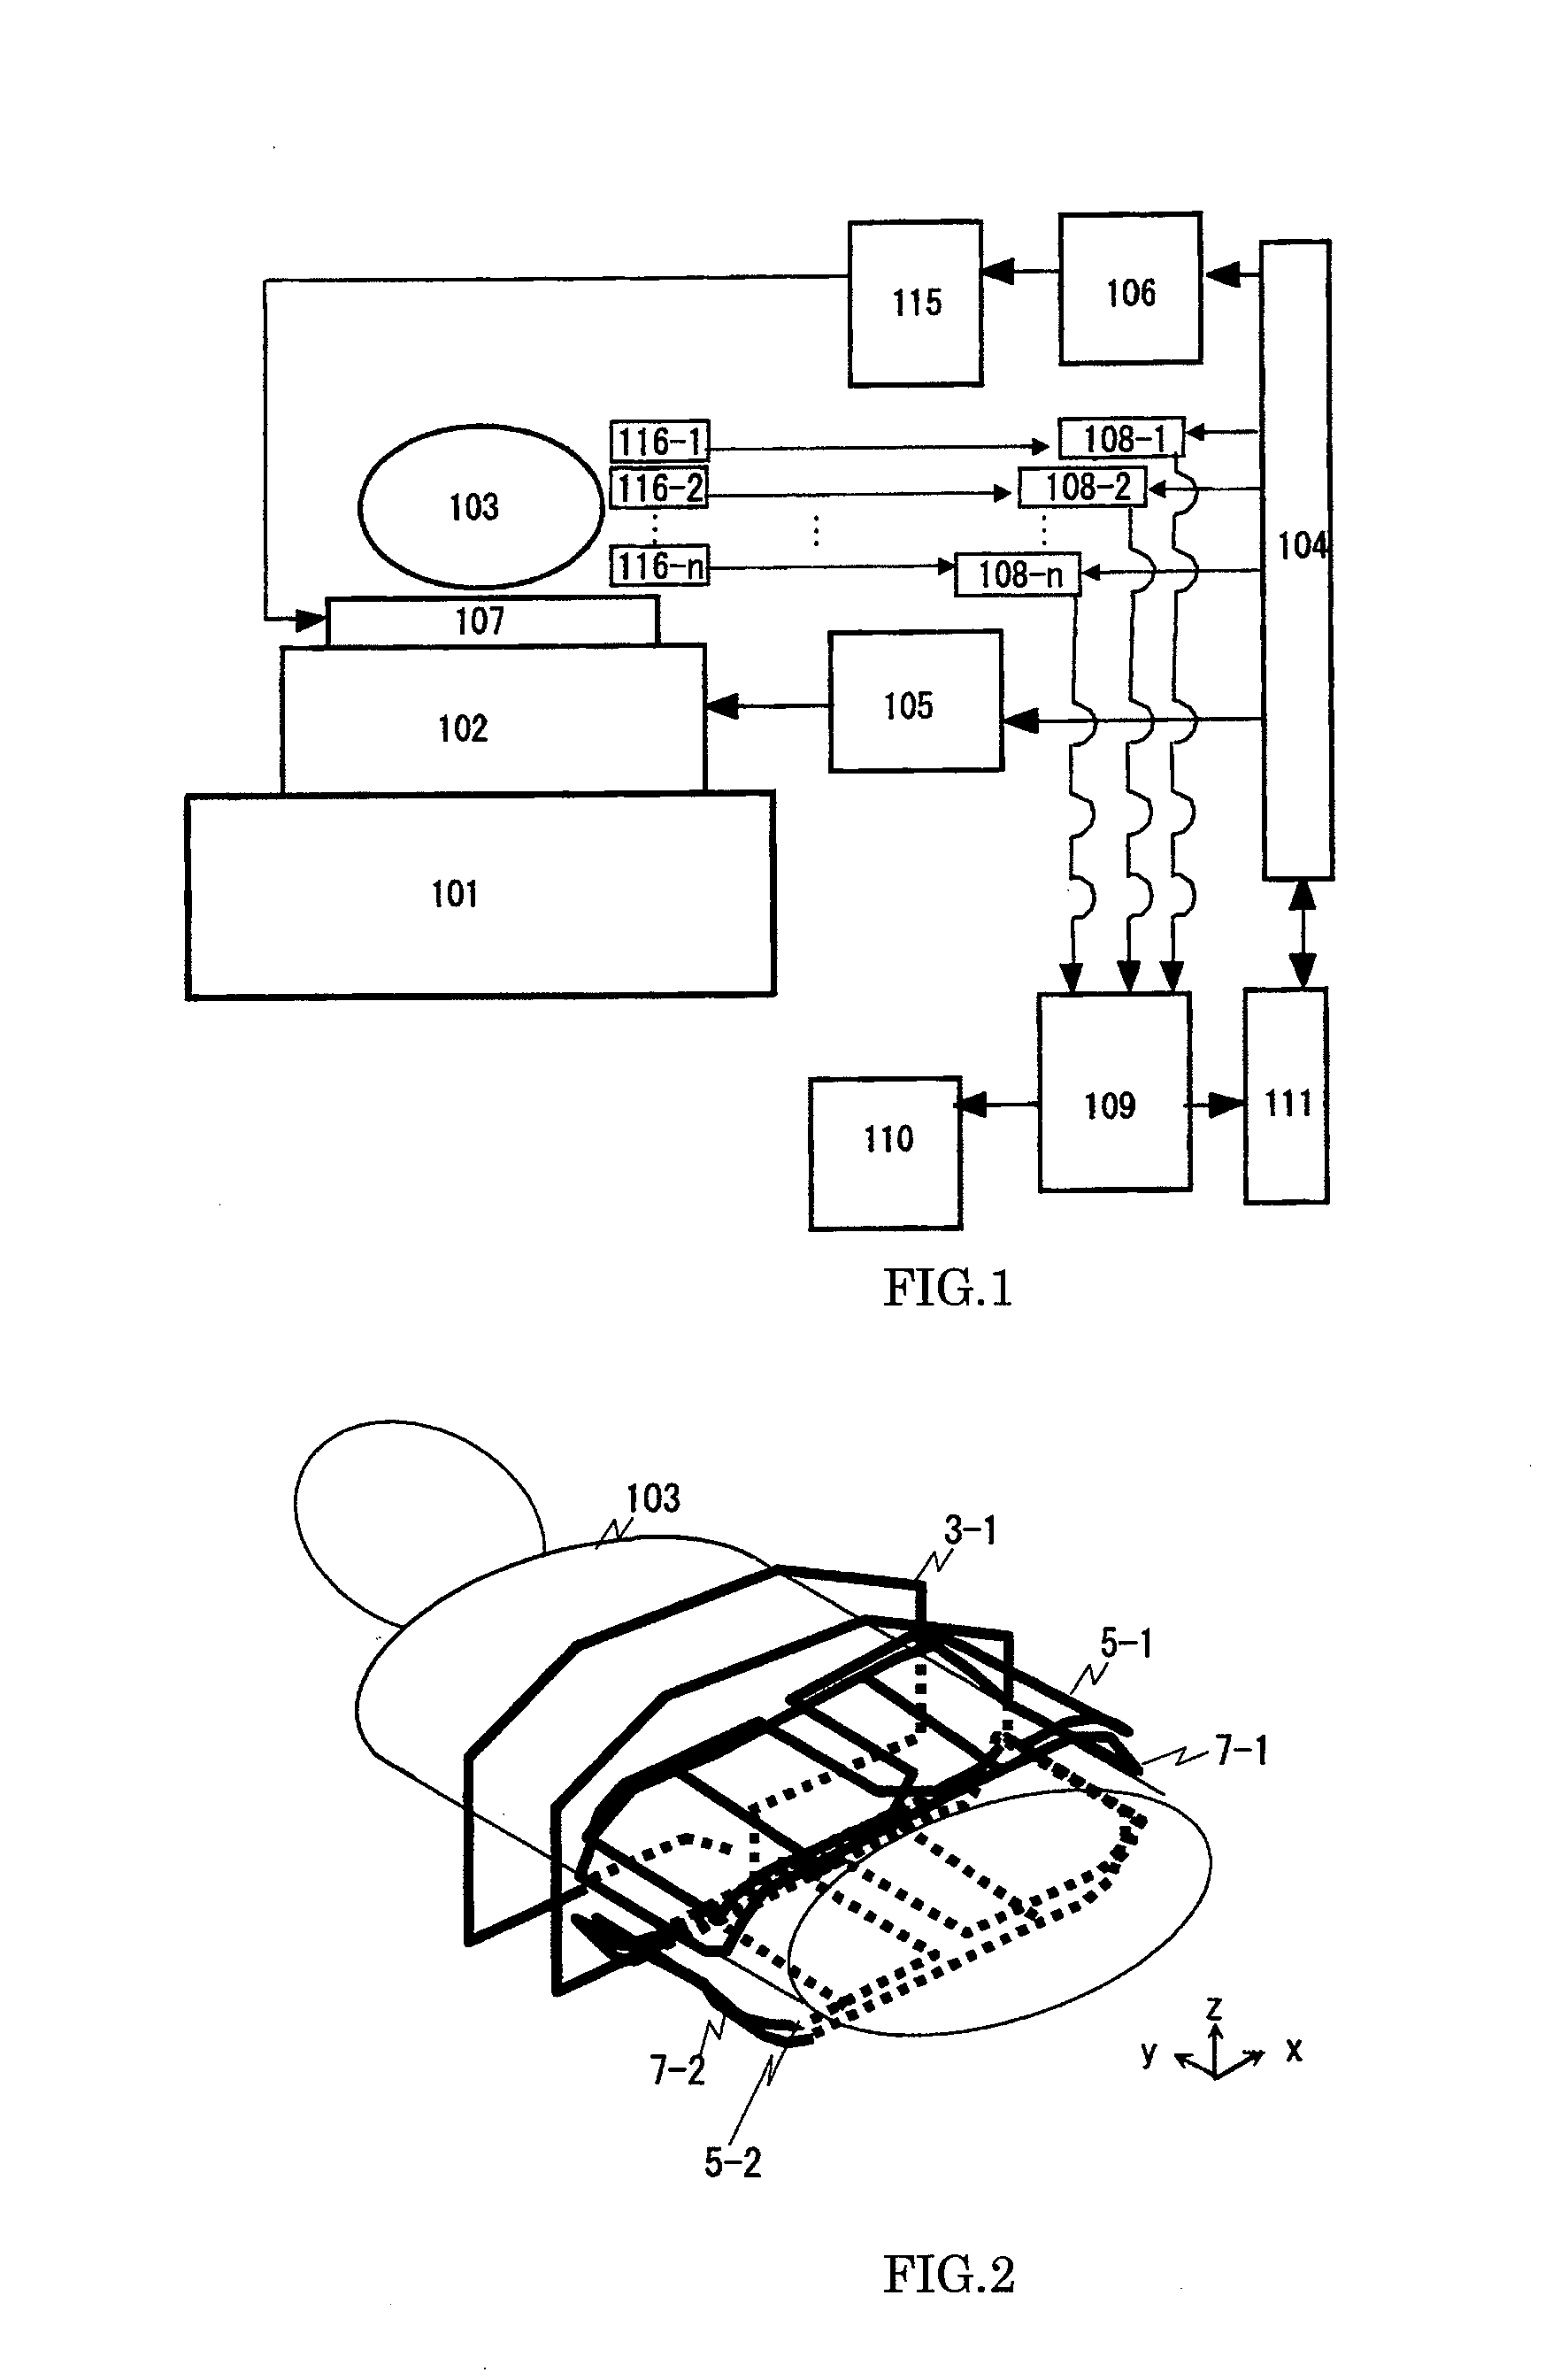 Inspection Apparatus using Magnetic Resonance and Nuclear Magnetic Resonance Signal Receiver Coil